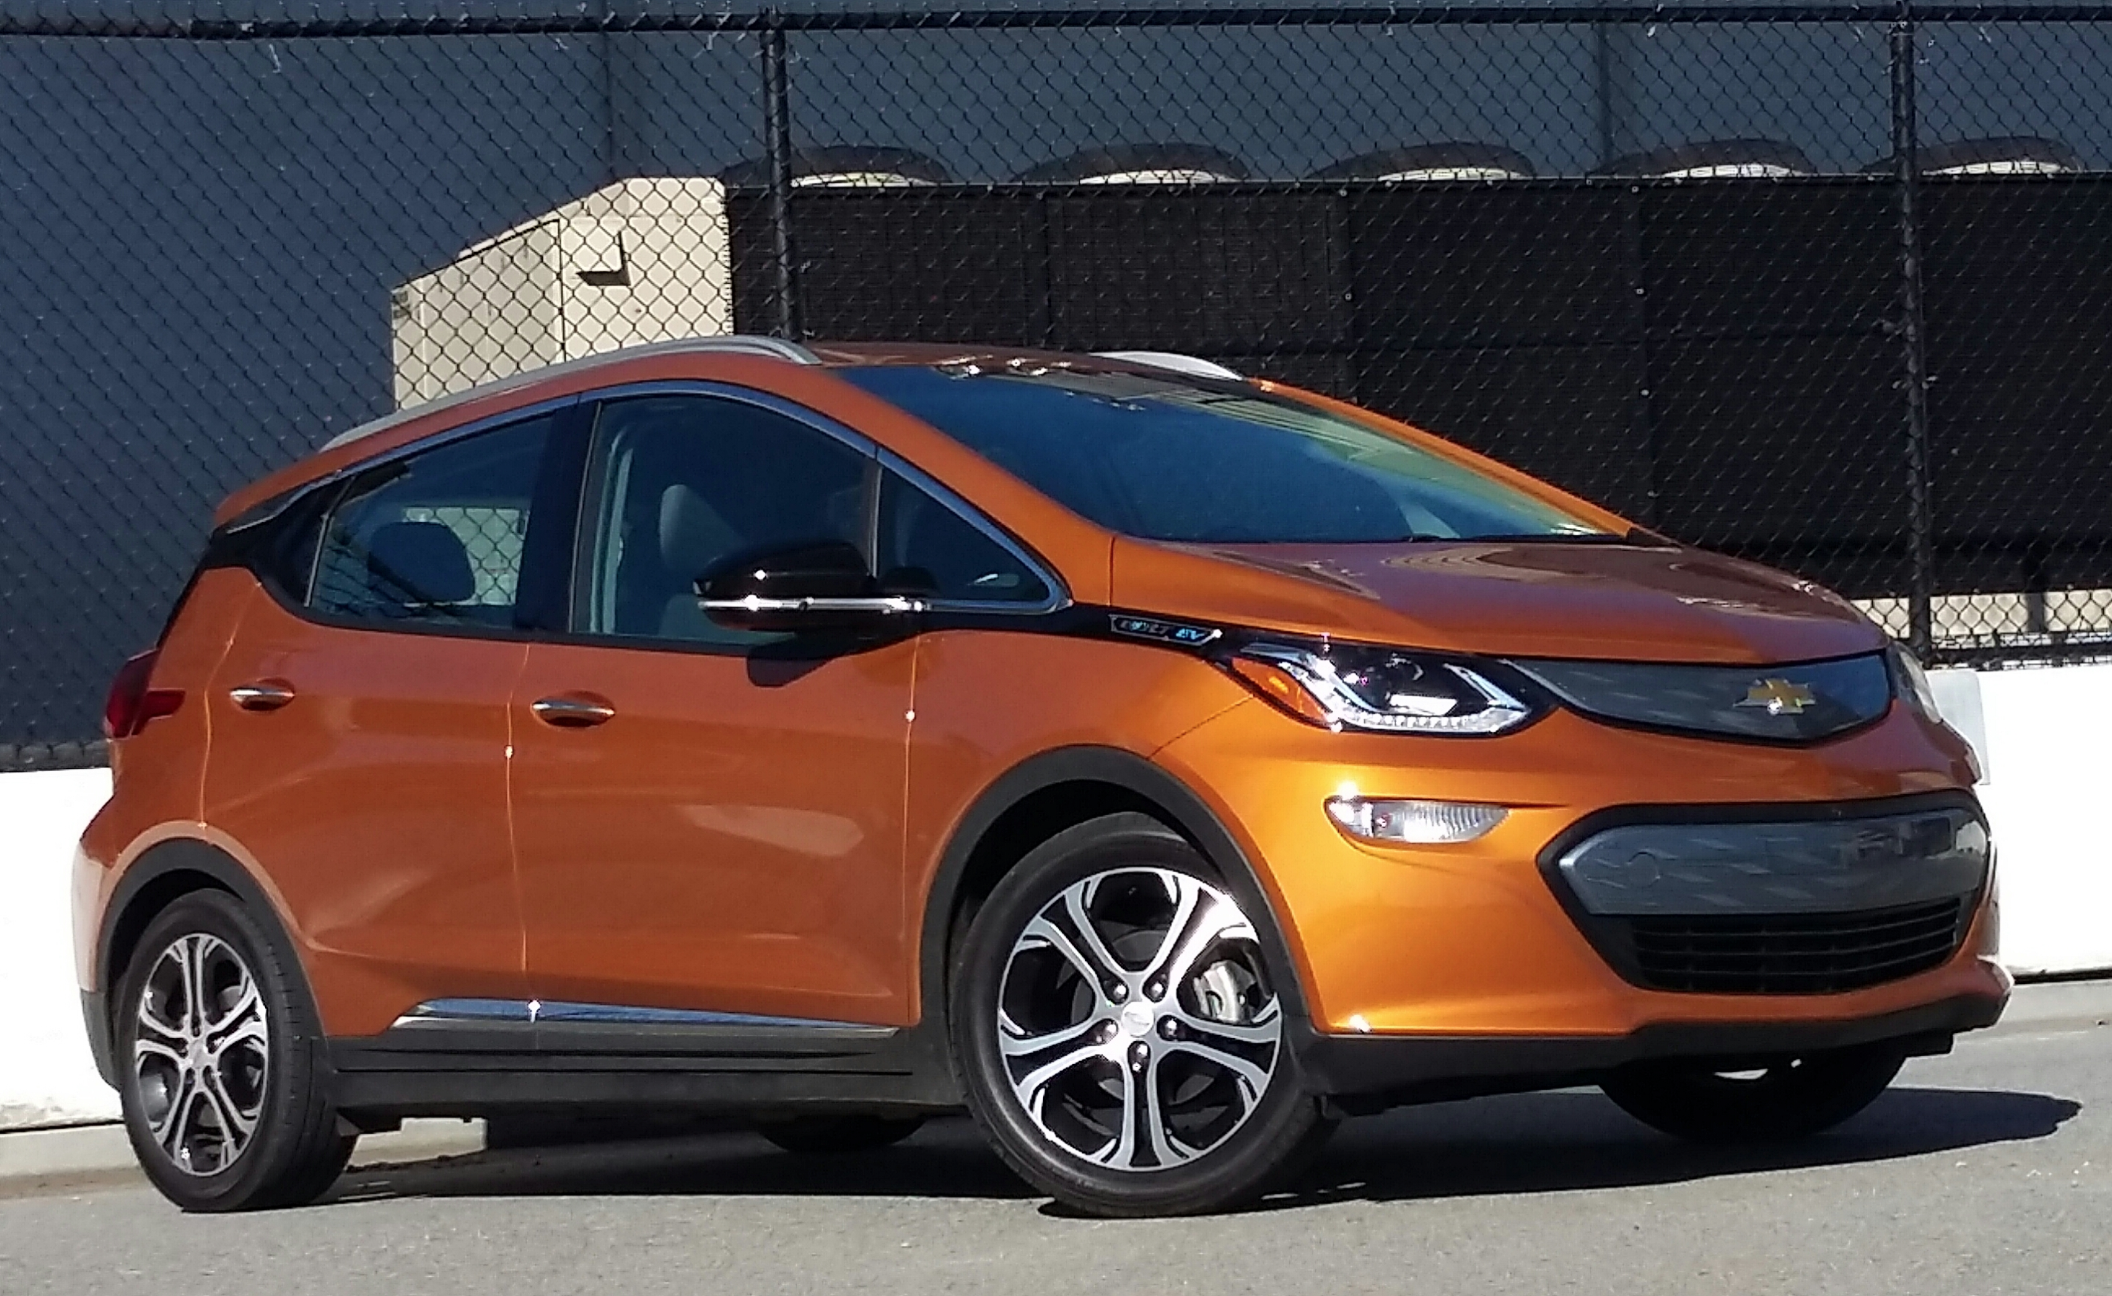 2017 Chevrolet Bolt The Daily Drive | Consumer Guide®